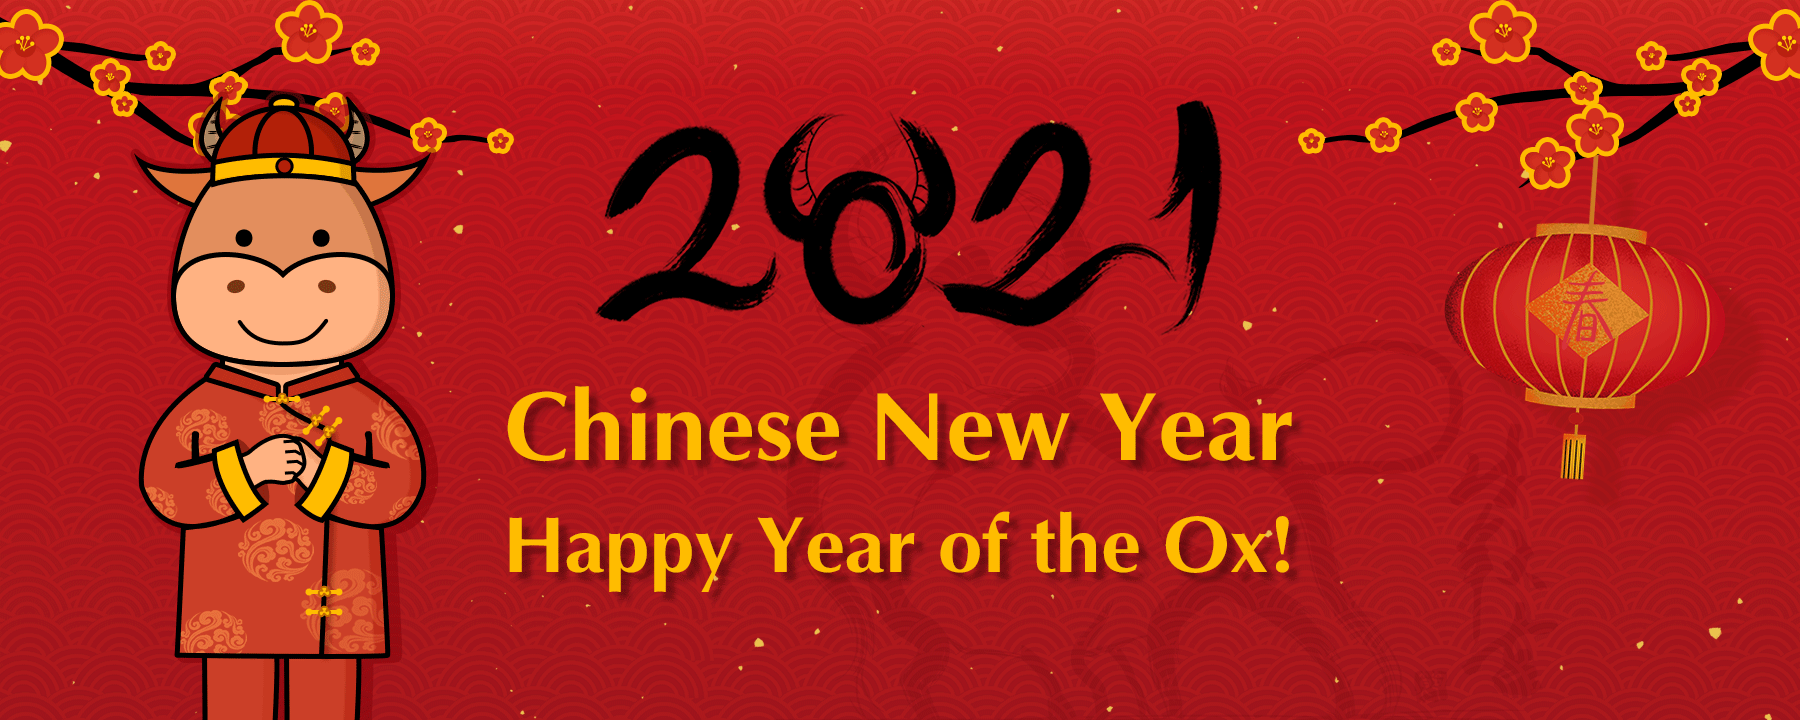 Chinese New Year (Dates, Traditions, Greetings, Zodiac Signs)